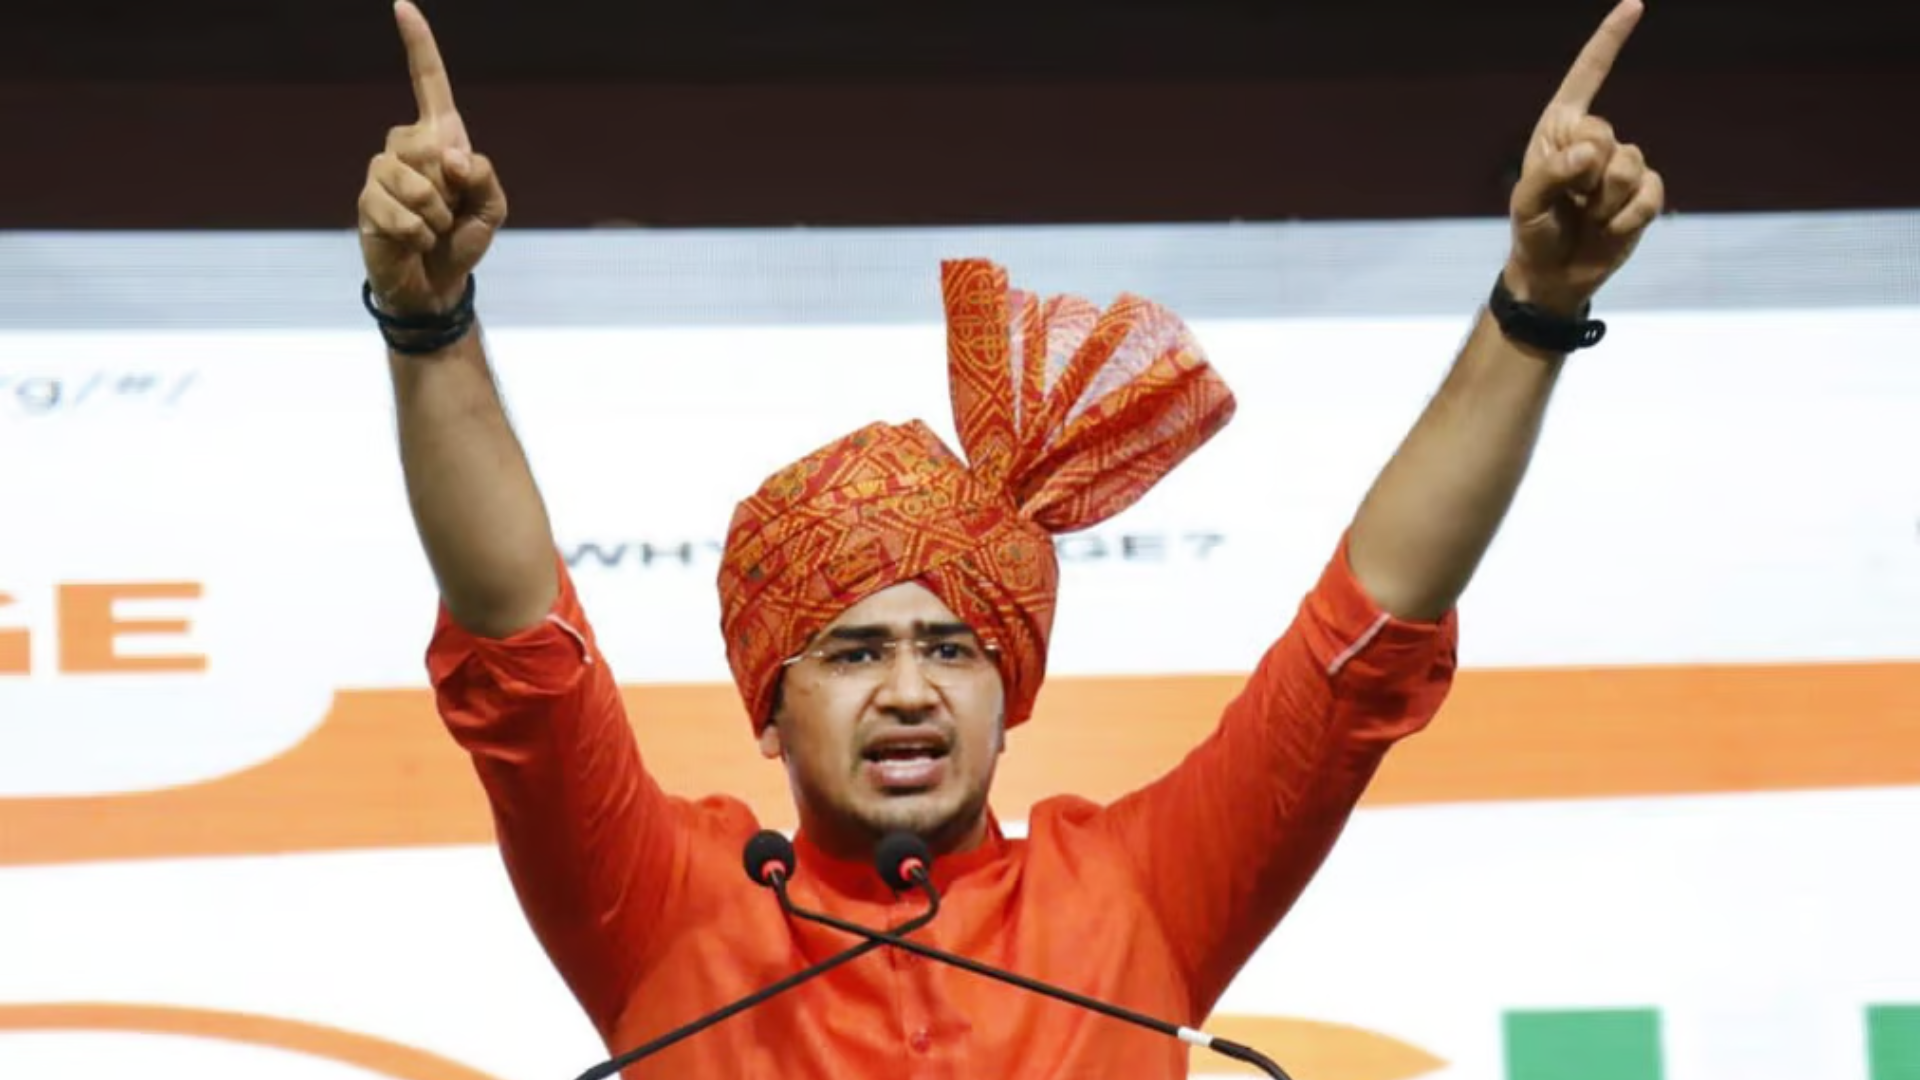 Bengaluru Event Turns Chaotic: BJP’s Tejasvi Surya Heckled, Forced To Leave; Election Commission Complaint Lodged